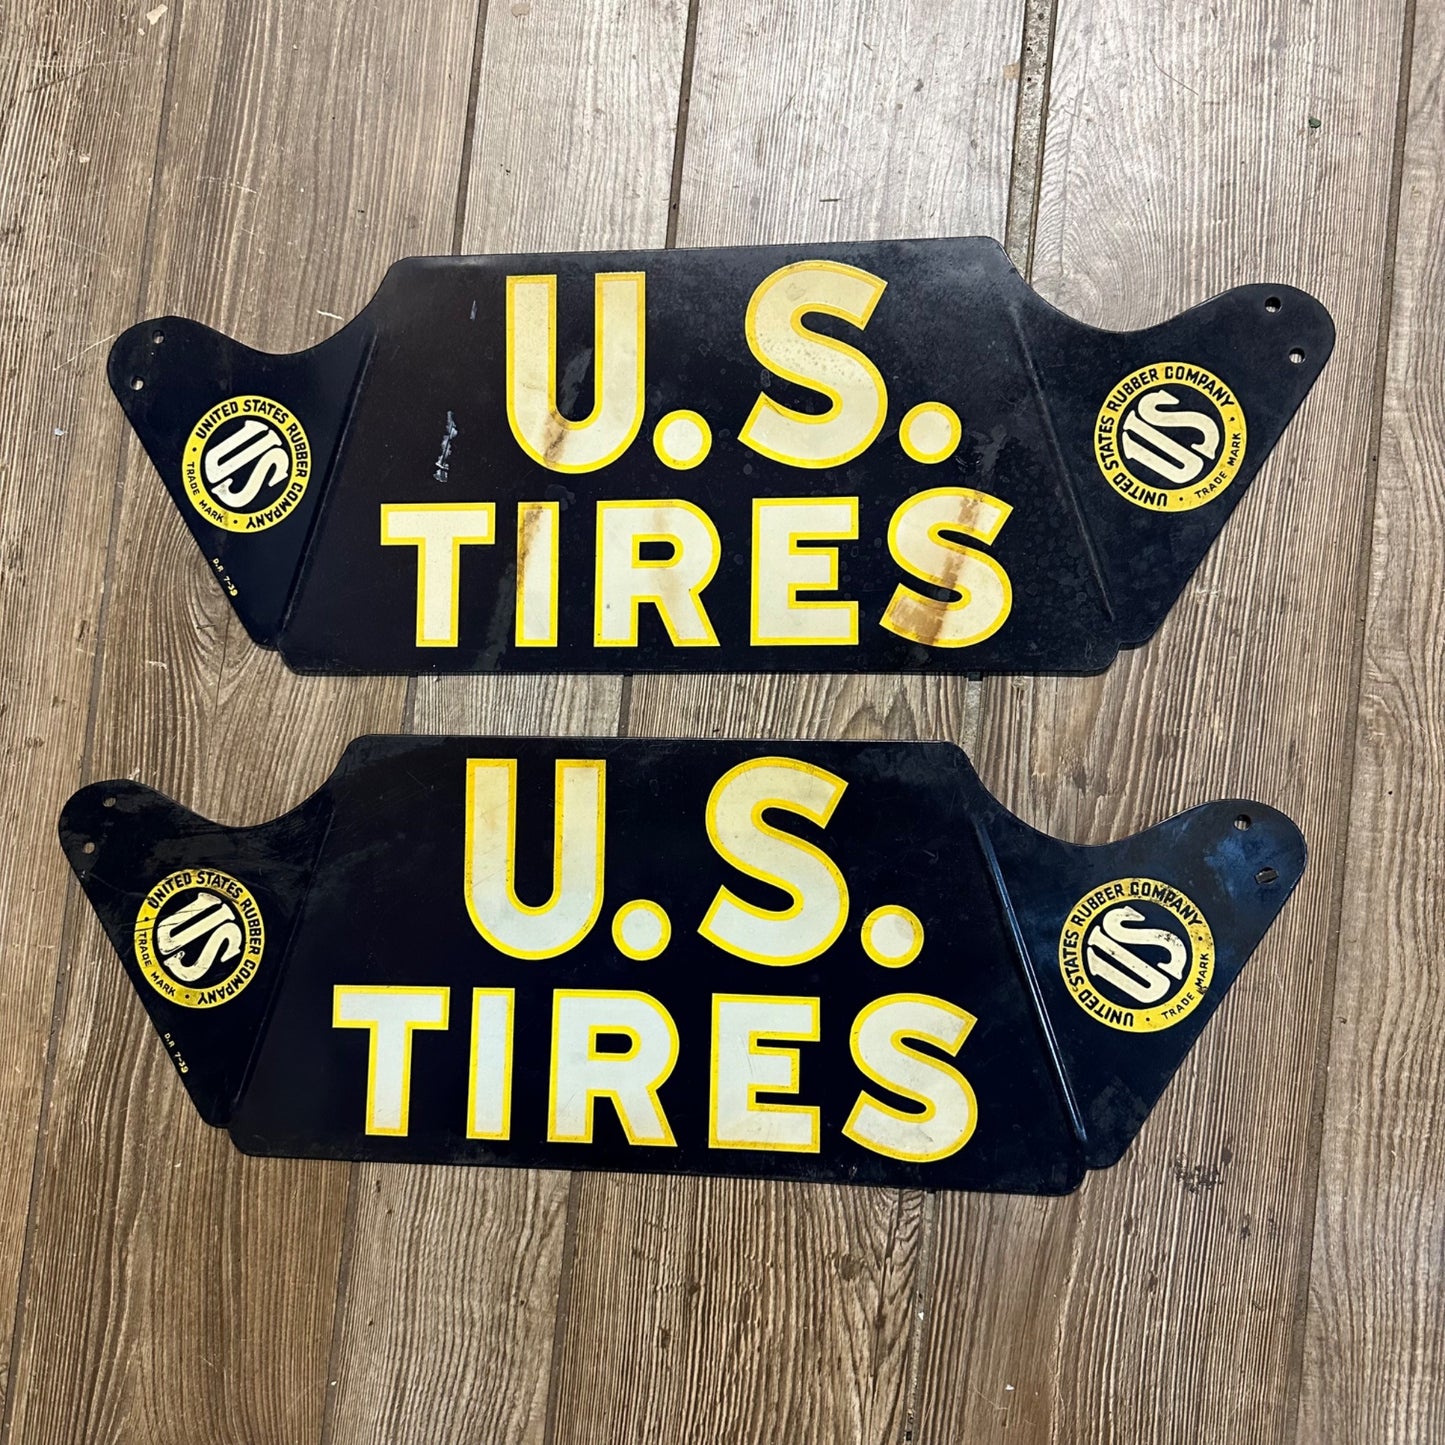 Vintage 1939 United States Rubber Co. US Tires Rack Tin Advertising Signs Pair (2)